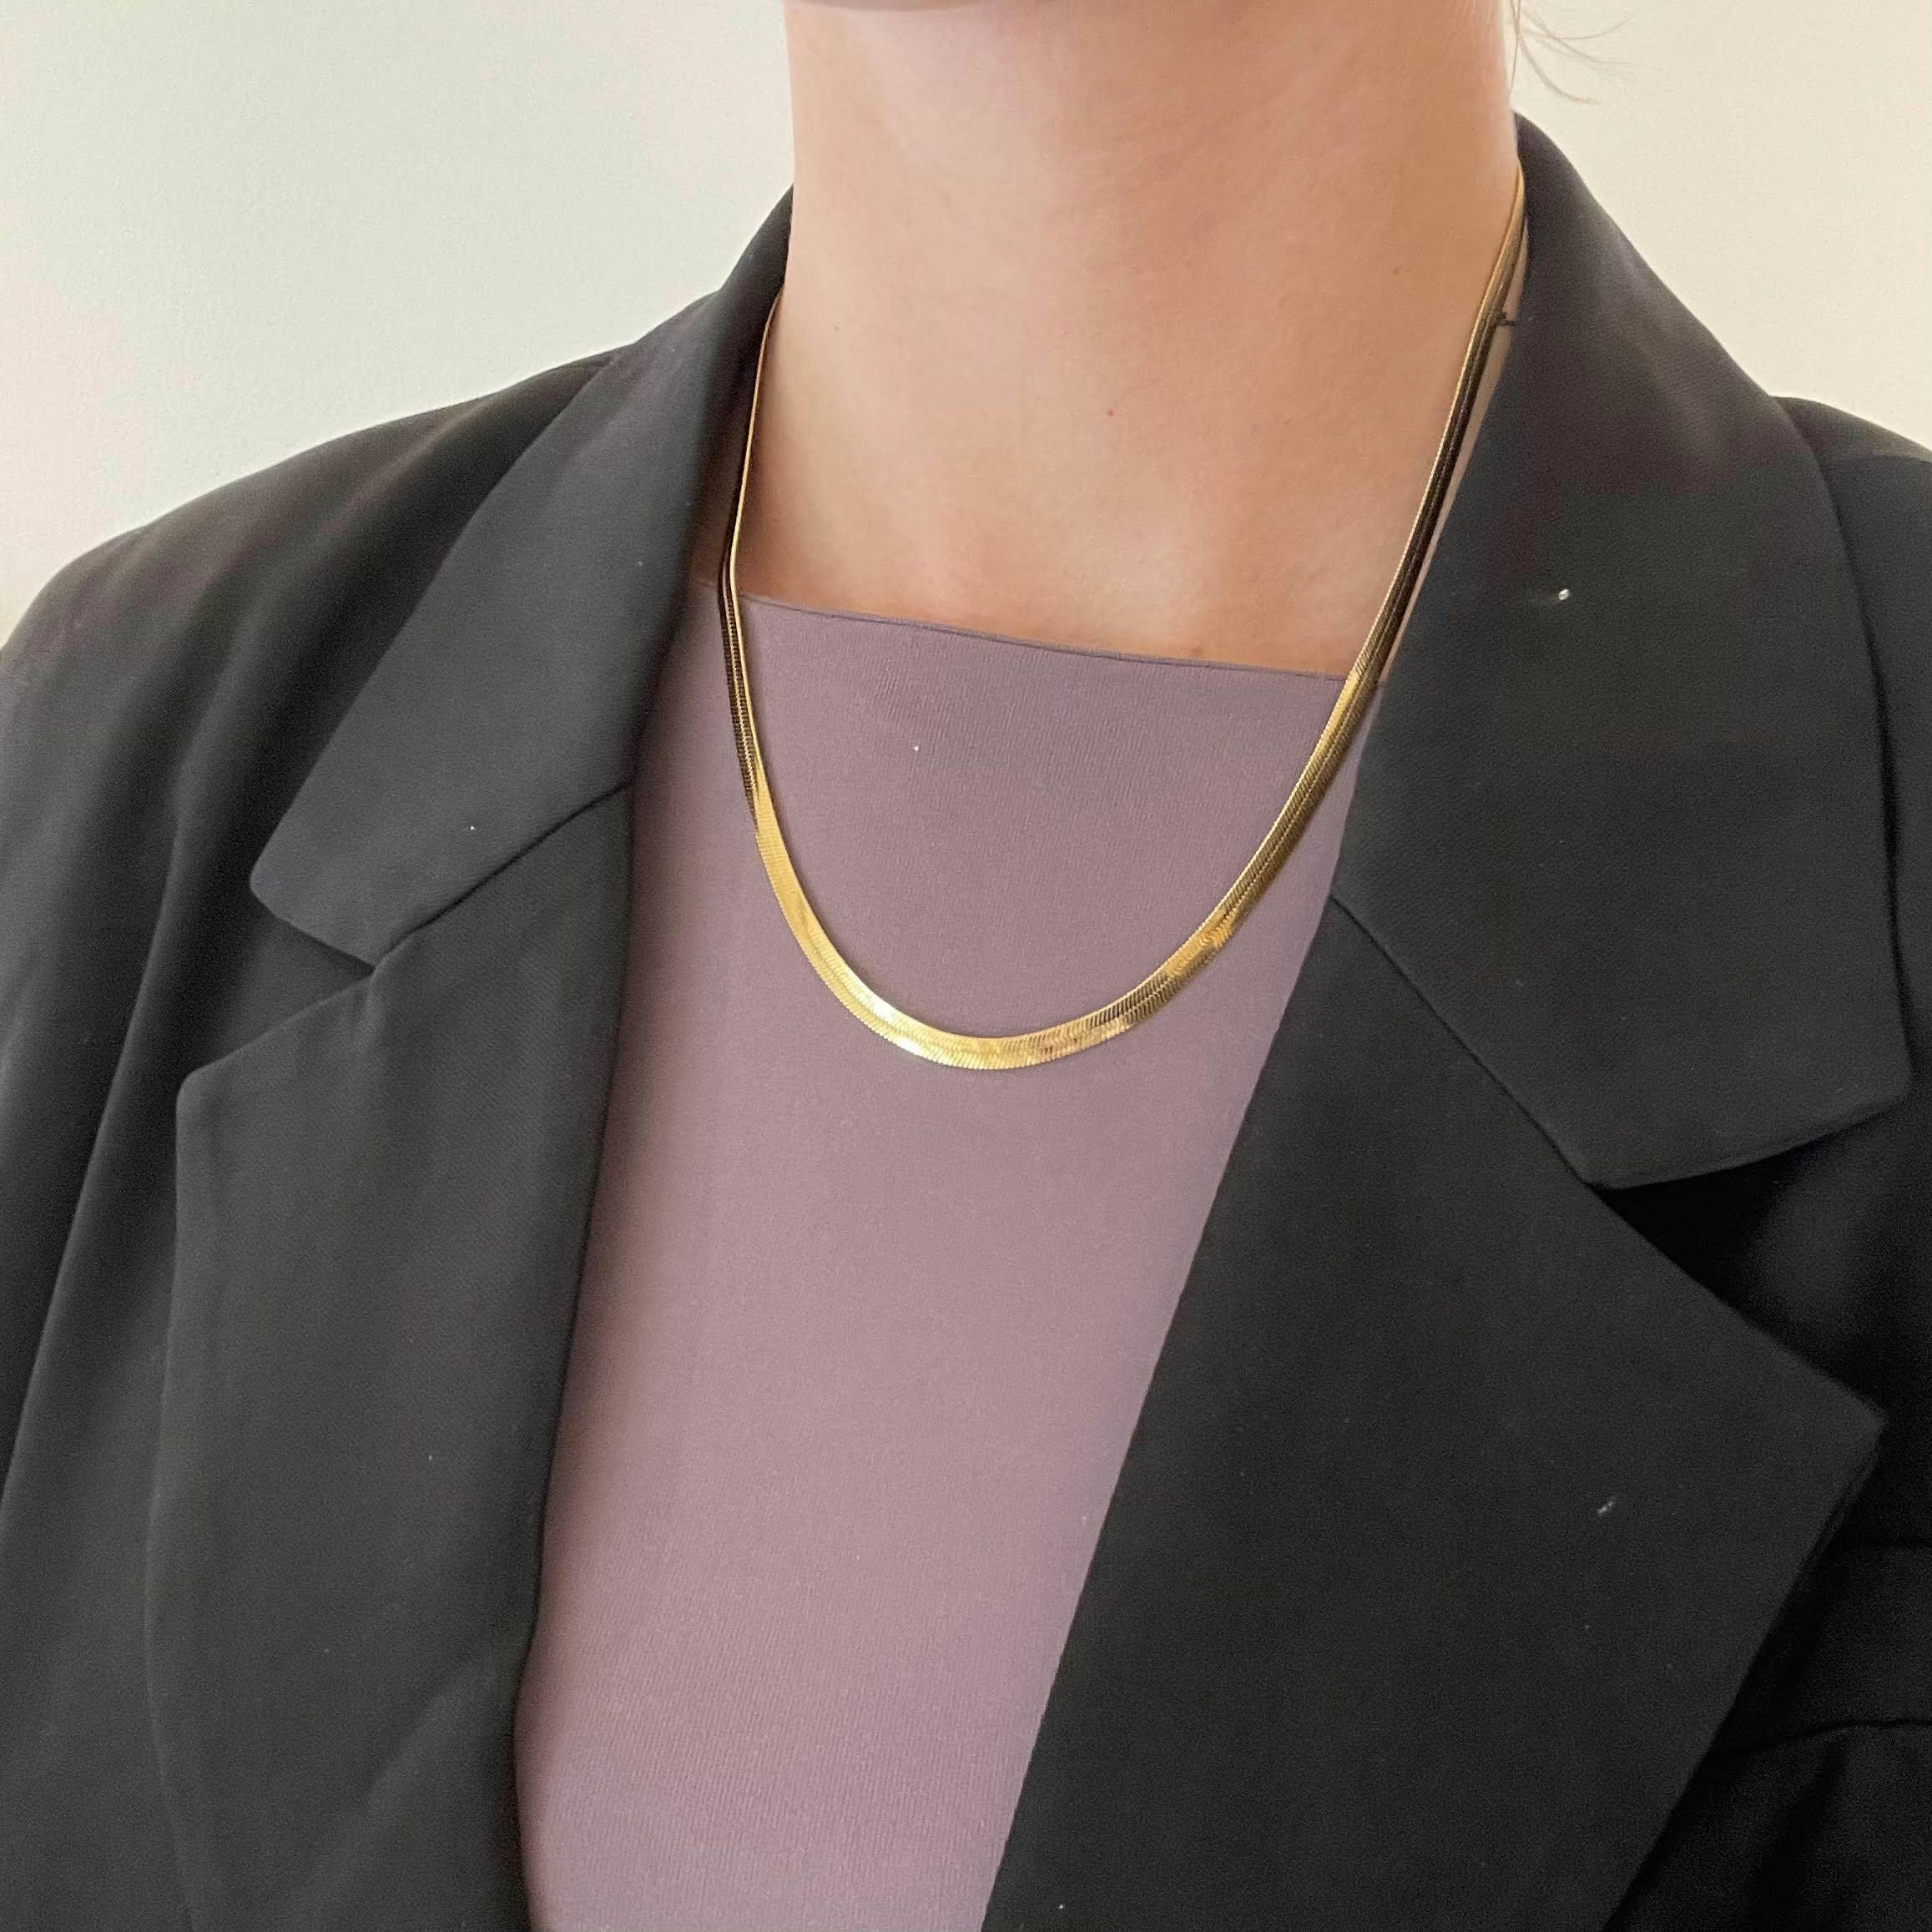 Edith necklace from Pernille Corydon in Goldplated-Silver Sterling 925|Blank